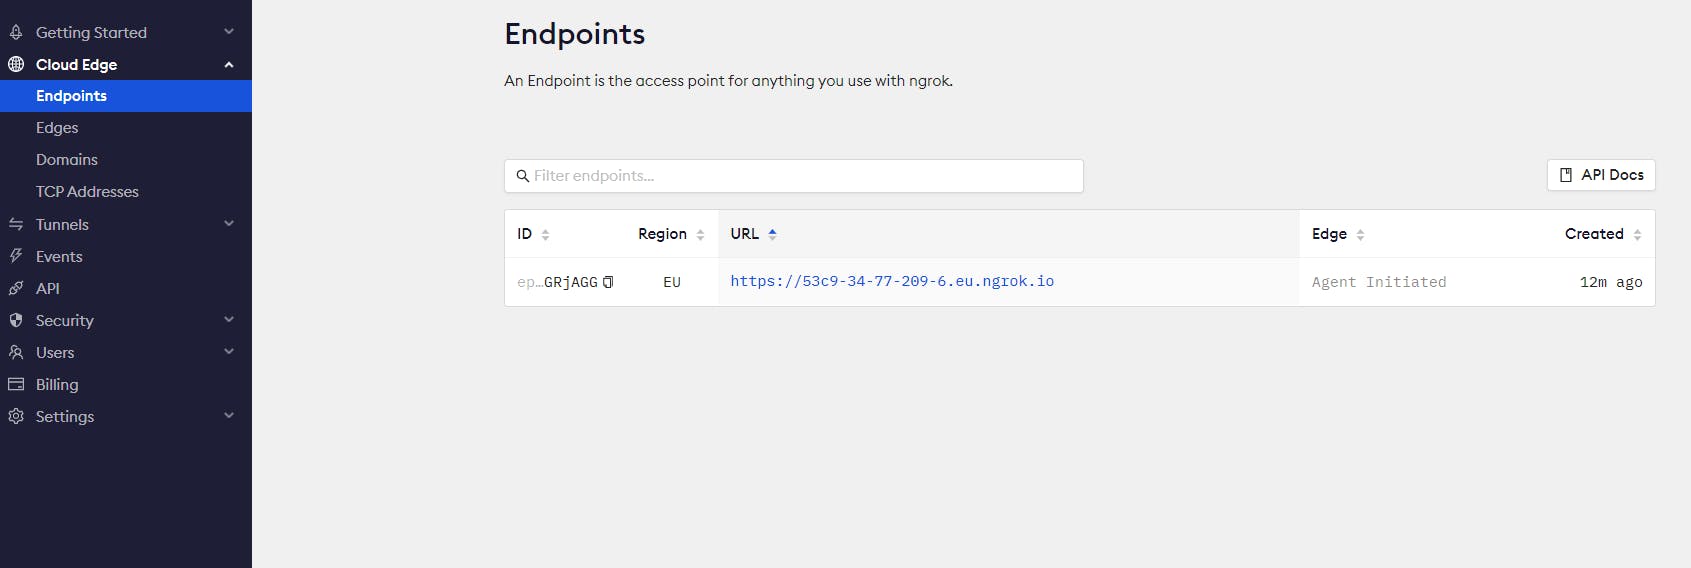 ngrok dashboard - endpoints page